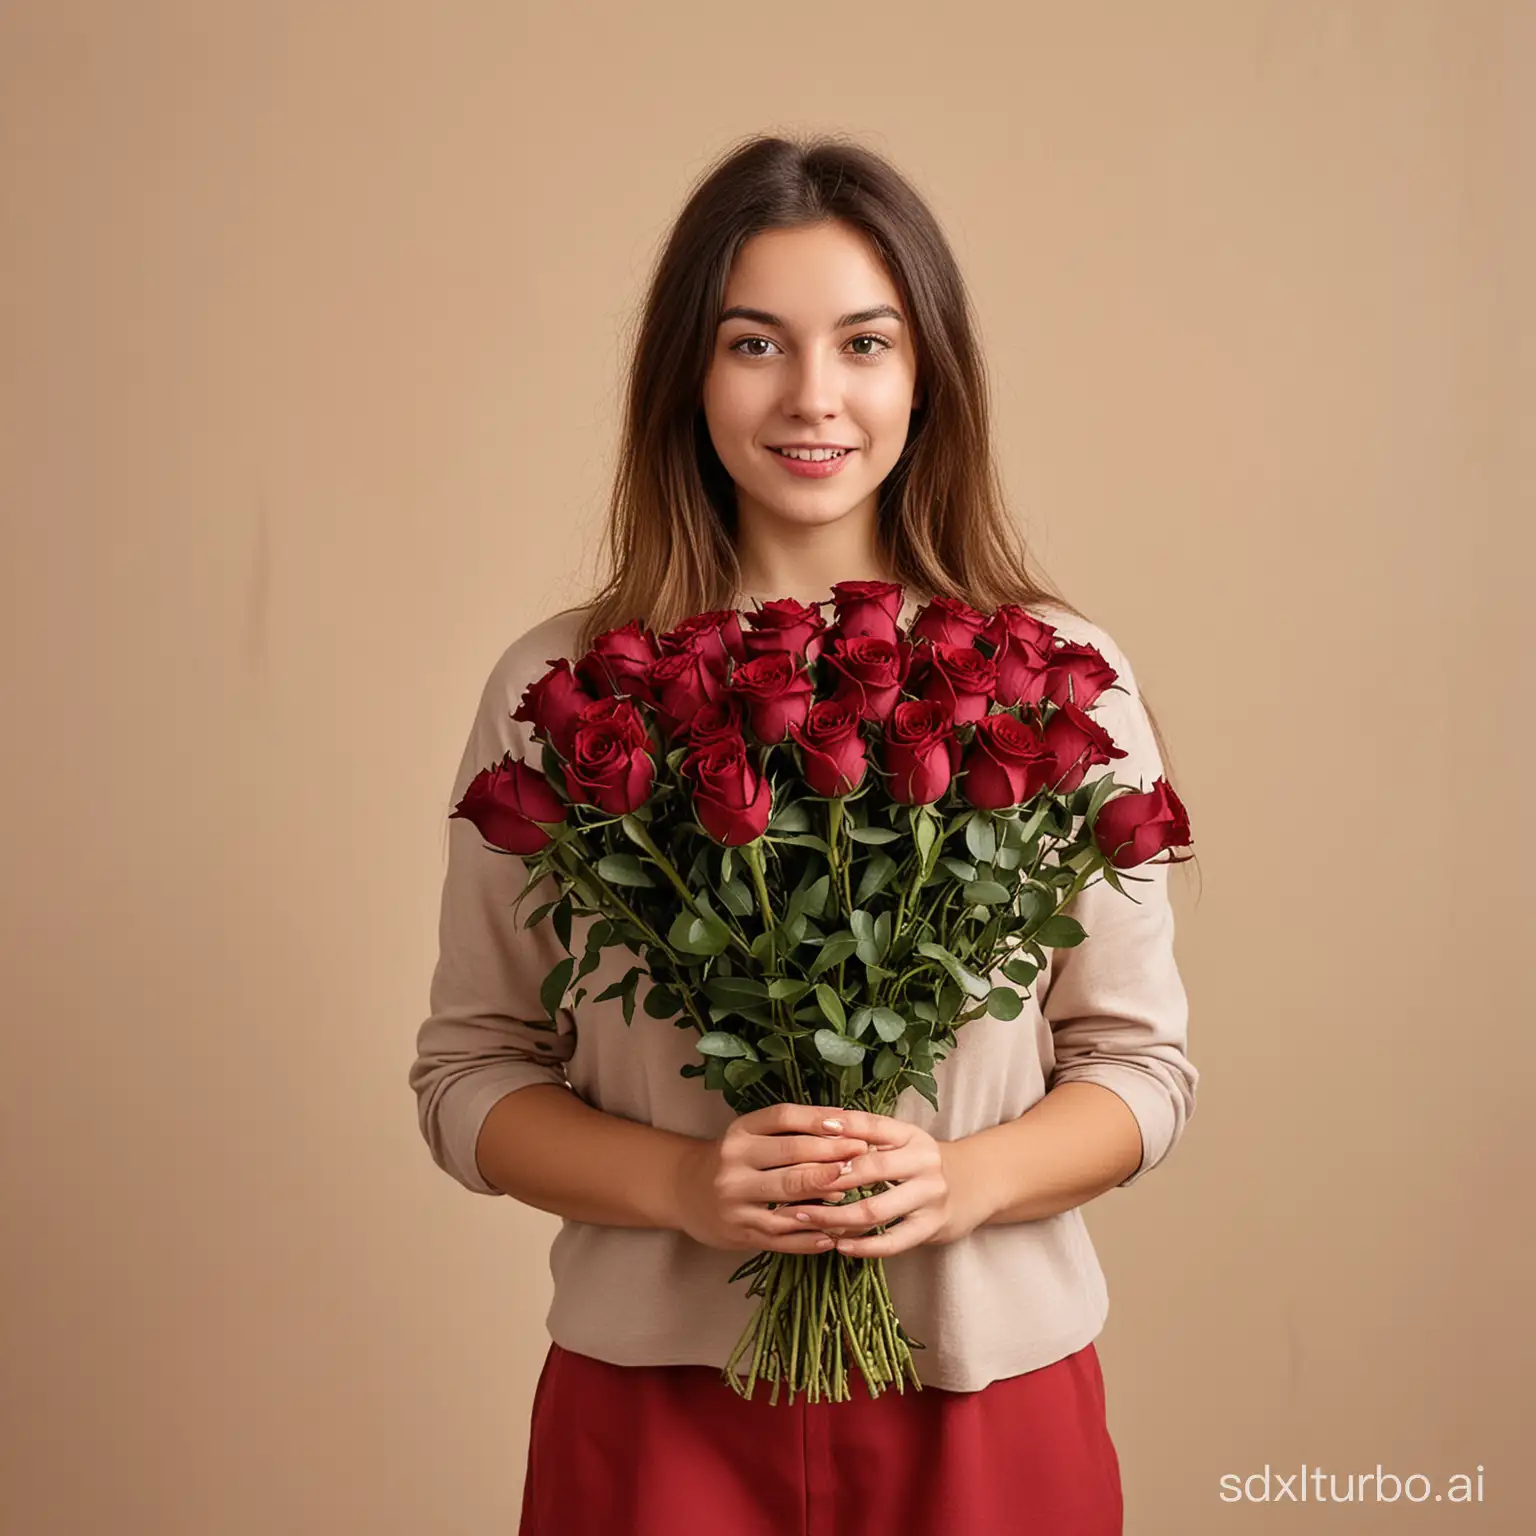 the girl holds 101 burgundy roses of the madame red variety in her hands. against the background of the girl there is a plain olive-colored wall.